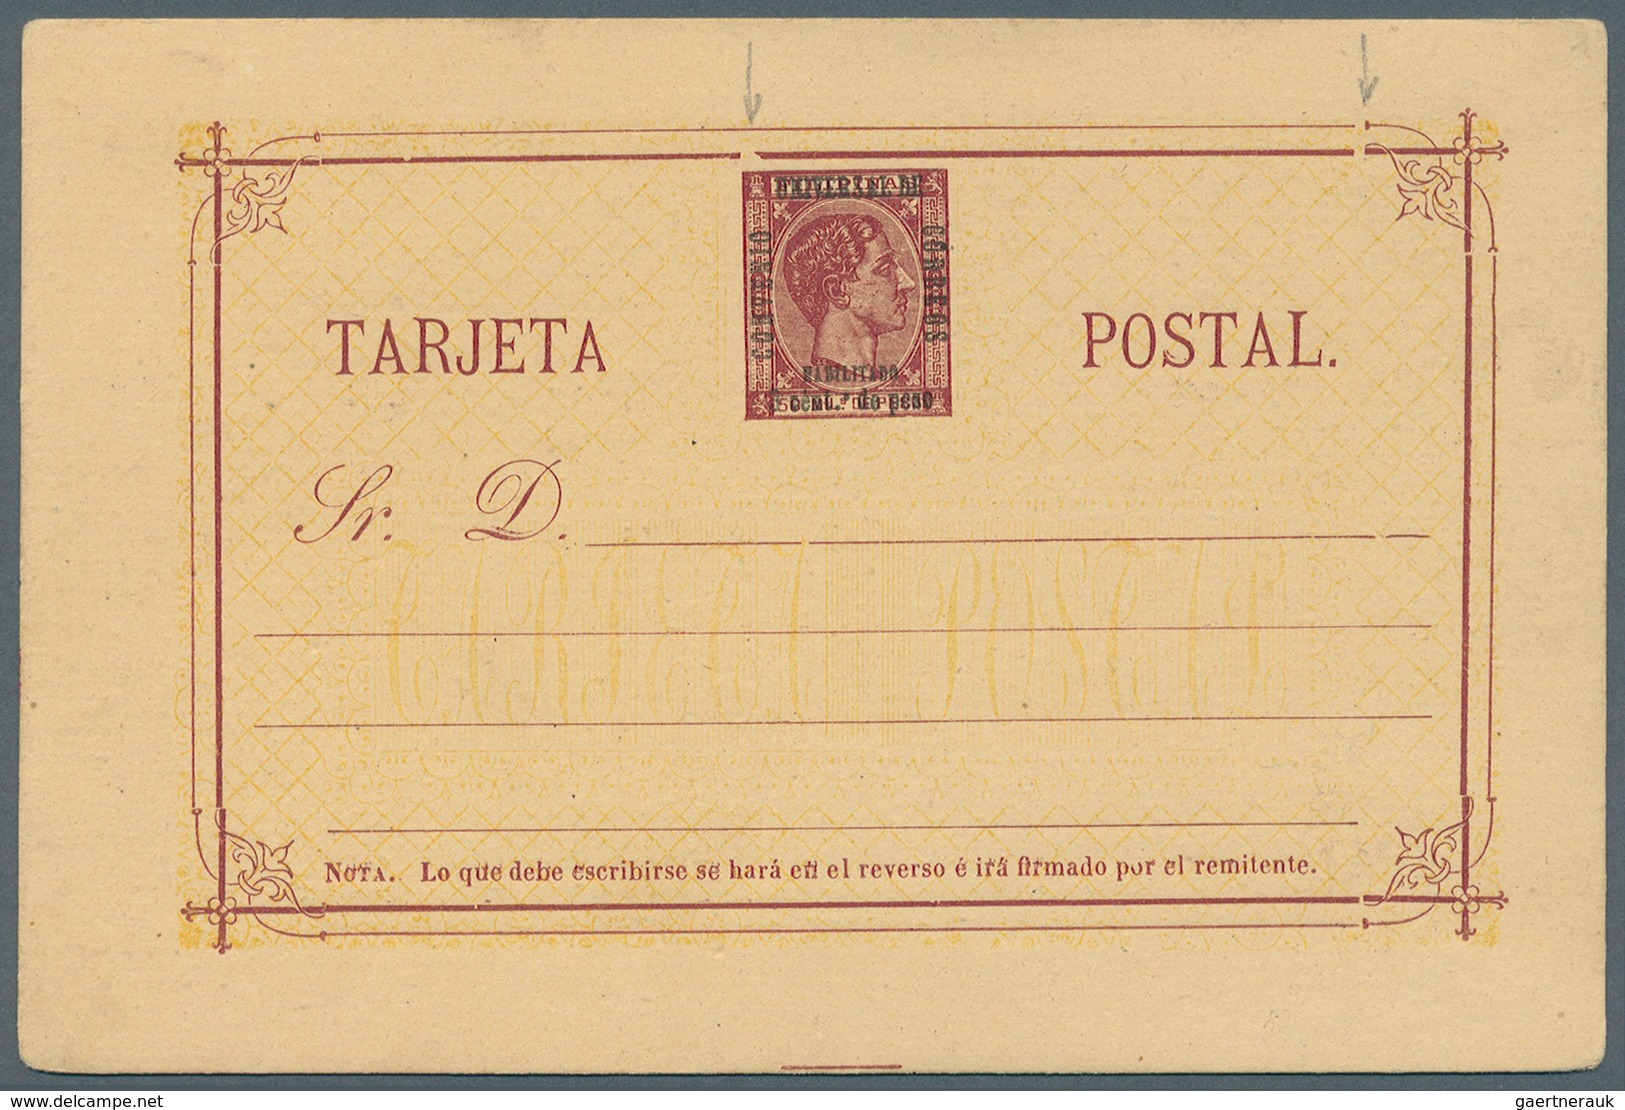 00409 Philippinen: 1880 UPU Surcharge 3c/50c, Tied By Oval Cancel Of Crosses In Association With Manila Di - Philippines